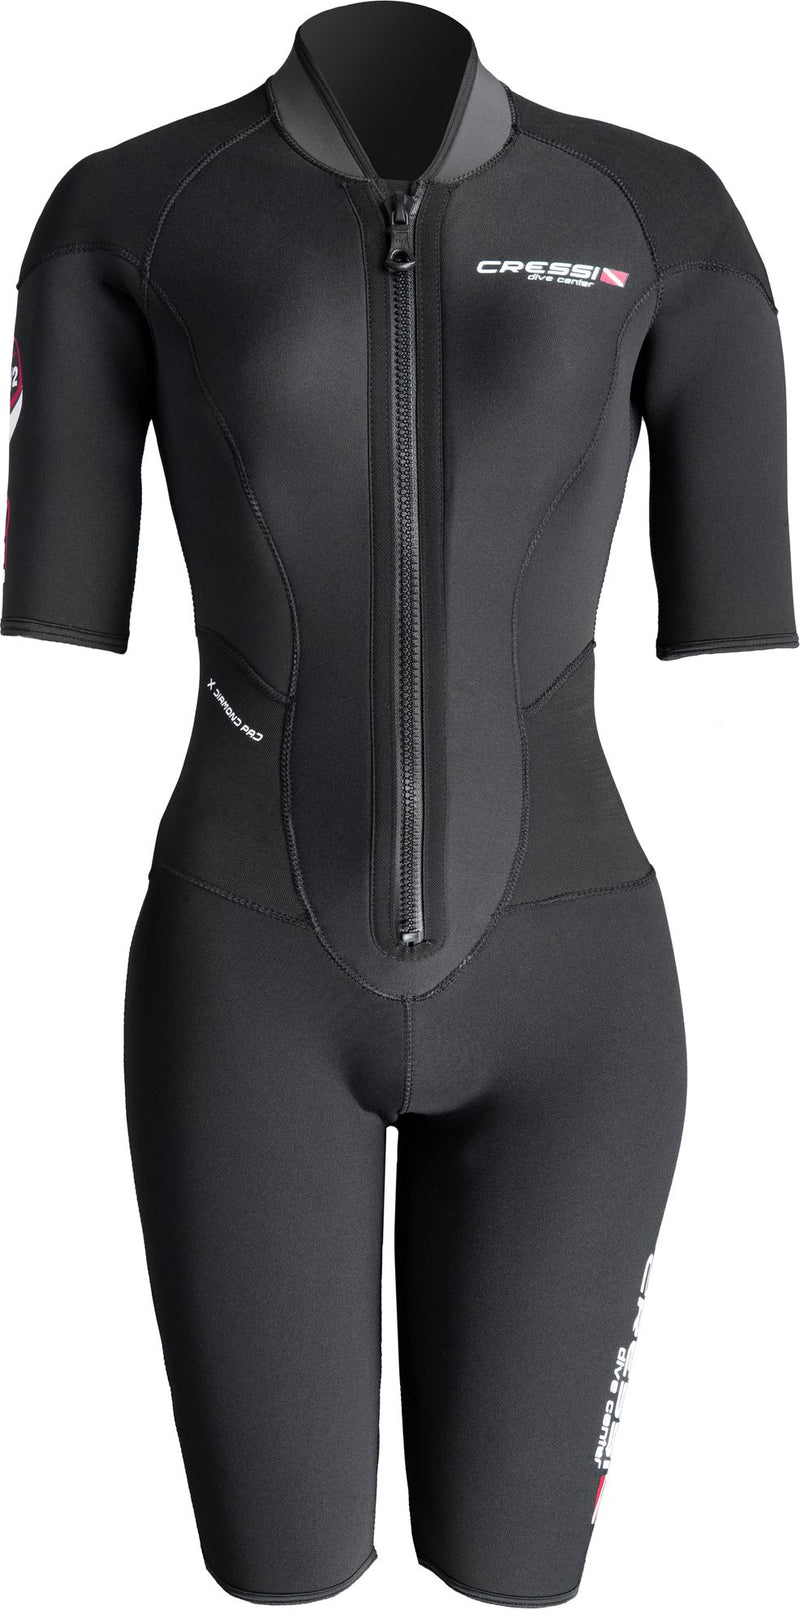 Cressi Endurance Shorty Lady shorty donna immersion subacque muta mute umid mutino scuba diving neoprene wetsuit short sleeve shorty lady